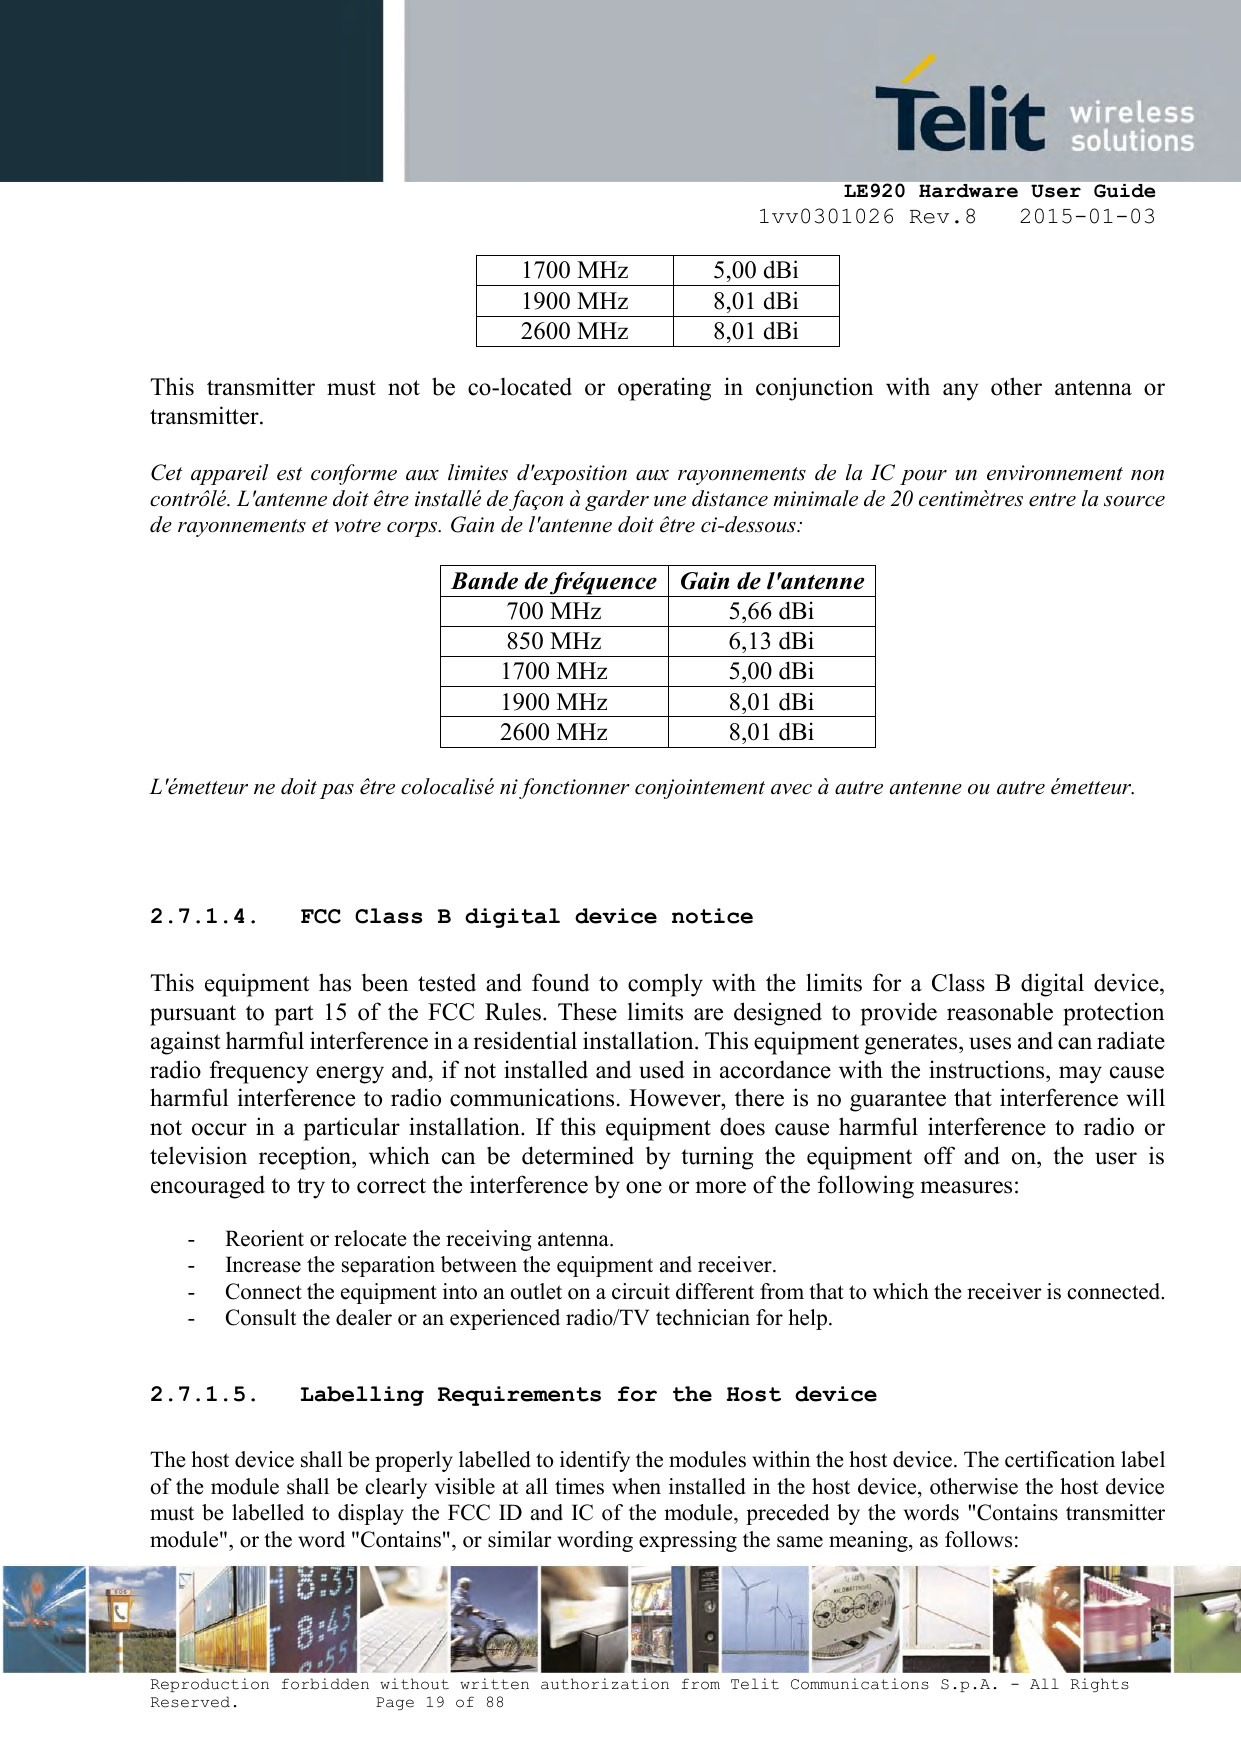     LE920 Hardware User Guide 1vv0301026 Rev.8   2015-01-03 Reproduction forbidden without written authorization from Telit Communications S.p.A. - All Rights Reserved.    Page 19 of 88  1700 MHz 5,00 dBi 1900 MHz 8,01 dBi 2600 MHz 8,01 dBi  This  transmitter  must  not  be  co-located  or  operating  in  conjunction  with  any  other  antenna  or transmitter.  Cet  appareil  est  conforme aux  limites d&apos;exposition aux  rayonnements  de  la  IC  pour  un  environnement non contrôlé. L&apos;antenne doit être installé de façon à garder une distance minimale de 20 centimètres entre la source de rayonnements et votre corps. Gain de l&apos;antenne doit être ci-dessous:  Bande de fréquence Gain de l&apos;antenne 700 MHz 5,66 dBi 850 MHz 6,13 dBi 1700 MHz 5,00 dBi 1900 MHz 8,01 dBi 2600 MHz 8,01 dBi  L&apos;émetteur ne doit pas être colocalisé ni fonctionner conjointement avec à autre antenne ou autre émetteur.    2.7.1.4. FCC Class B digital device notice  This  equipment  has  been  tested  and  found  to  comply  with  the  limits  for  a  Class  B  digital  device, pursuant  to  part  15  of  the  FCC  Rules.  These  limits  are  designed  to  provide  reasonable  protection against harmful interference in a residential installation. This equipment generates, uses and can radiate radio frequency energy and, if not installed and used in accordance with the instructions, may cause harmful interference to radio communications. However, there is no guarantee that interference will not occur in  a particular installation.  If this  equipment  does cause  harmful  interference  to radio  or television  reception,  which  can  be  determined  by  turning  the  equipment  off  and  on,  the  user  is encouraged to try to correct the interference by one or more of the following measures:  - Reorient or relocate the receiving antenna. - Increase the separation between the equipment and receiver.  - Connect the equipment into an outlet on a circuit different from that to which the receiver is connected.  - Consult the dealer or an experienced radio/TV technician for help.  2.7.1.5. Labelling Requirements for the Host device  The host device shall be properly labelled to identify the modules within the host device. The certification label of the module shall be clearly visible at all times when installed in the host device, otherwise the host device must be labelled to display the FCC ID and IC of the module, preceded by the words &quot;Contains transmitter module&quot;, or the word &quot;Contains&quot;, or similar wording expressing the same meaning, as follows: 